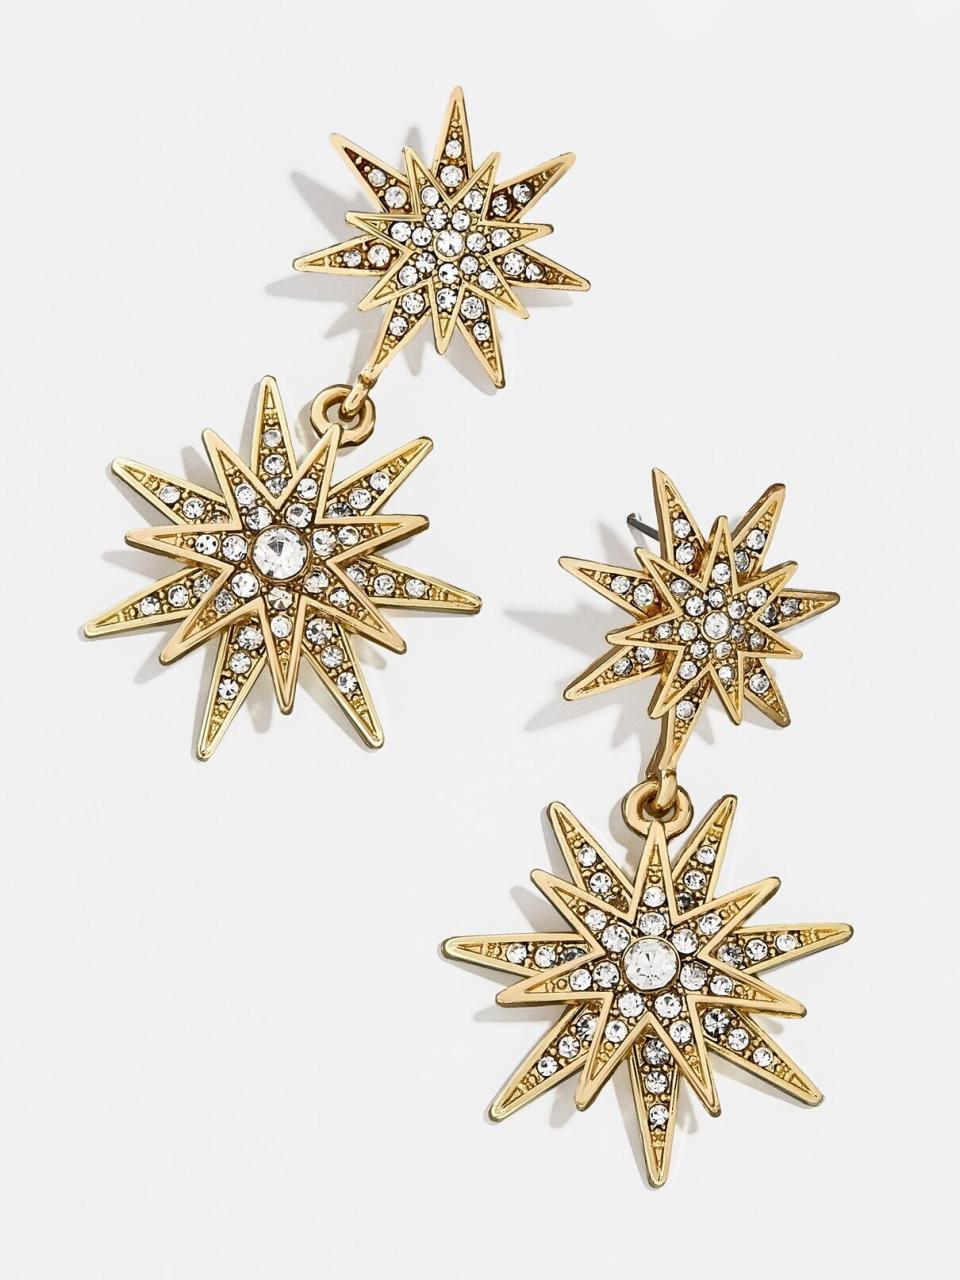 <a href="https://fave.co/31Whr8P" target="_blank" rel="noopener noreferrer">Get these for $36 at Baubleba</a>r.